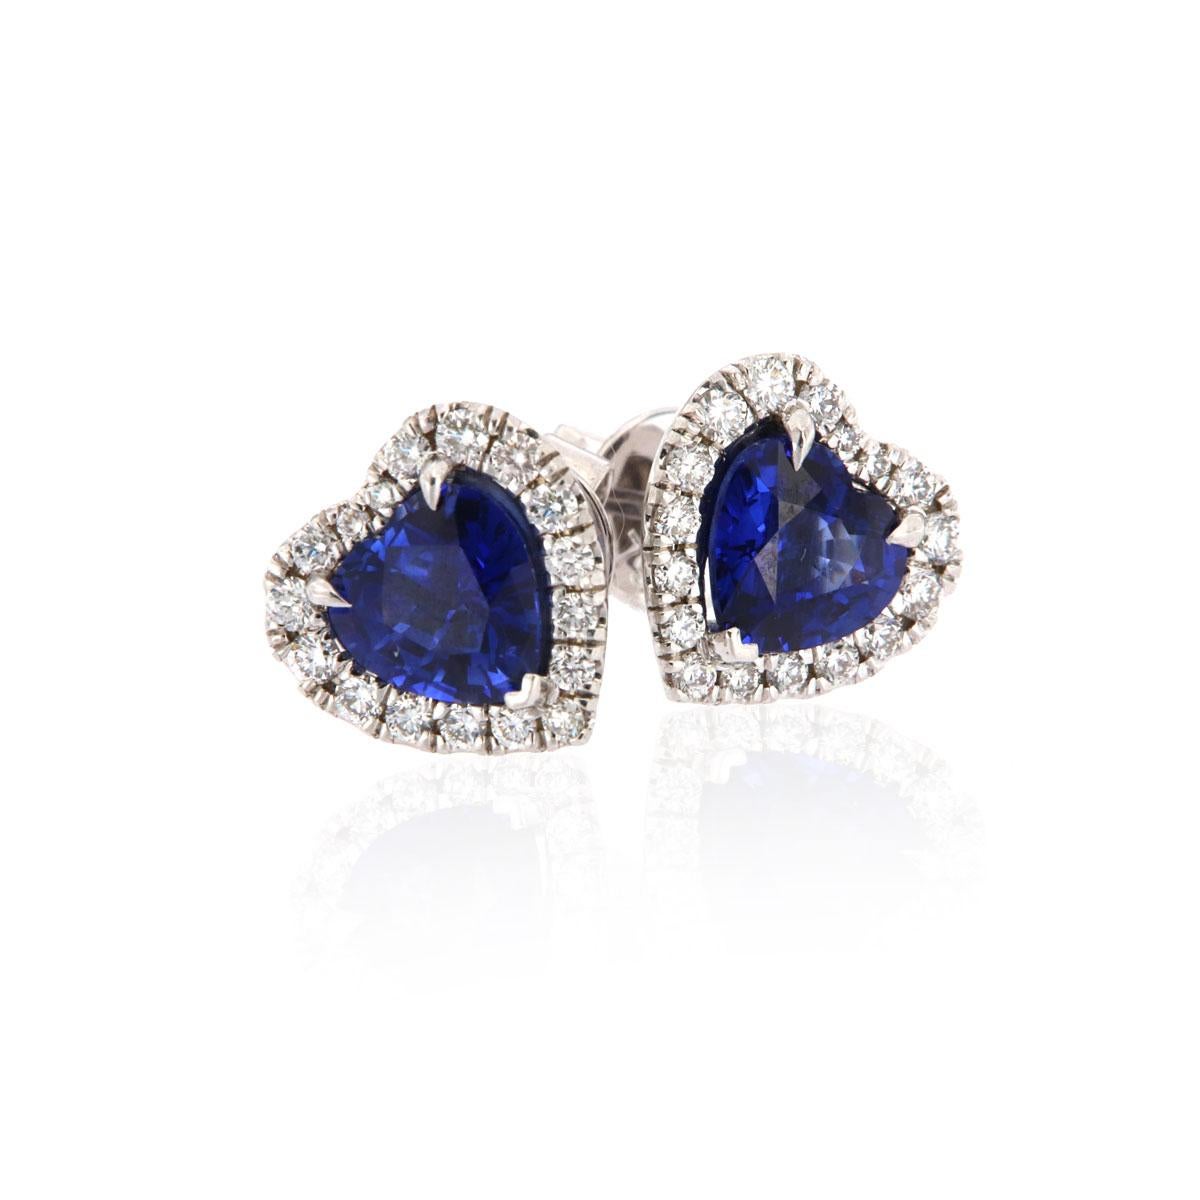 These sparkling halo earrings feature two perfectly matched Heart shape Royal Blue Natural Sapphires in a total weight of 3.13 carat. The sapphires are surrounded by a brilliant halo of micro-prongs diamond accents in a total weight of 0.60 carats.